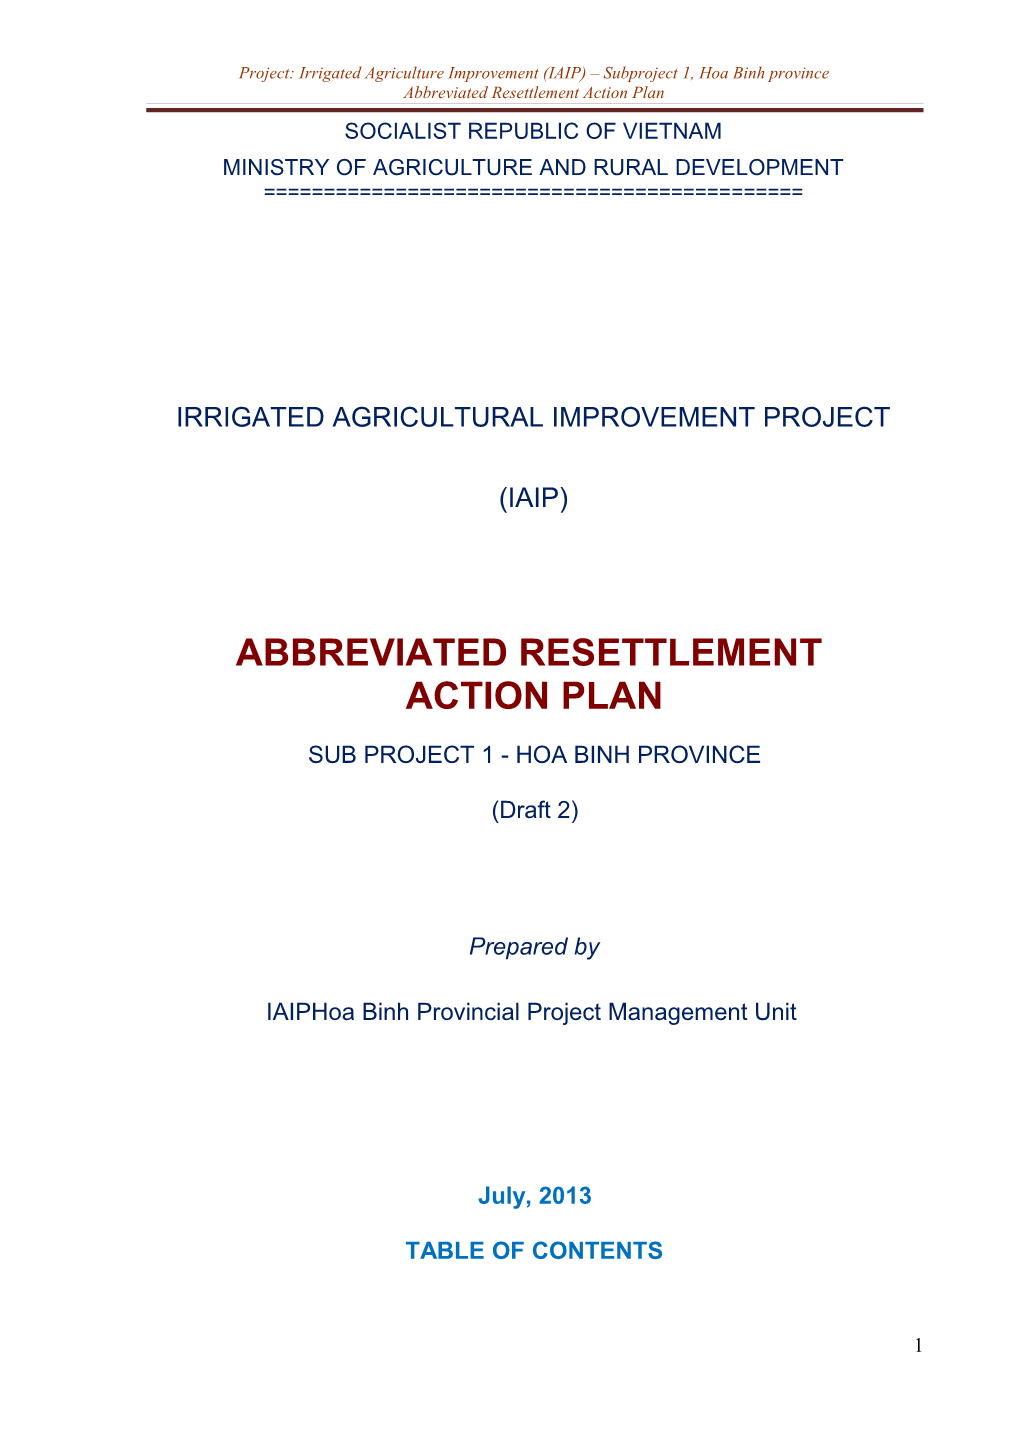 Project: Irrigated Agriculture Improvement (IAIP) Subproject 1, Hoa Binh Province Abbreviated